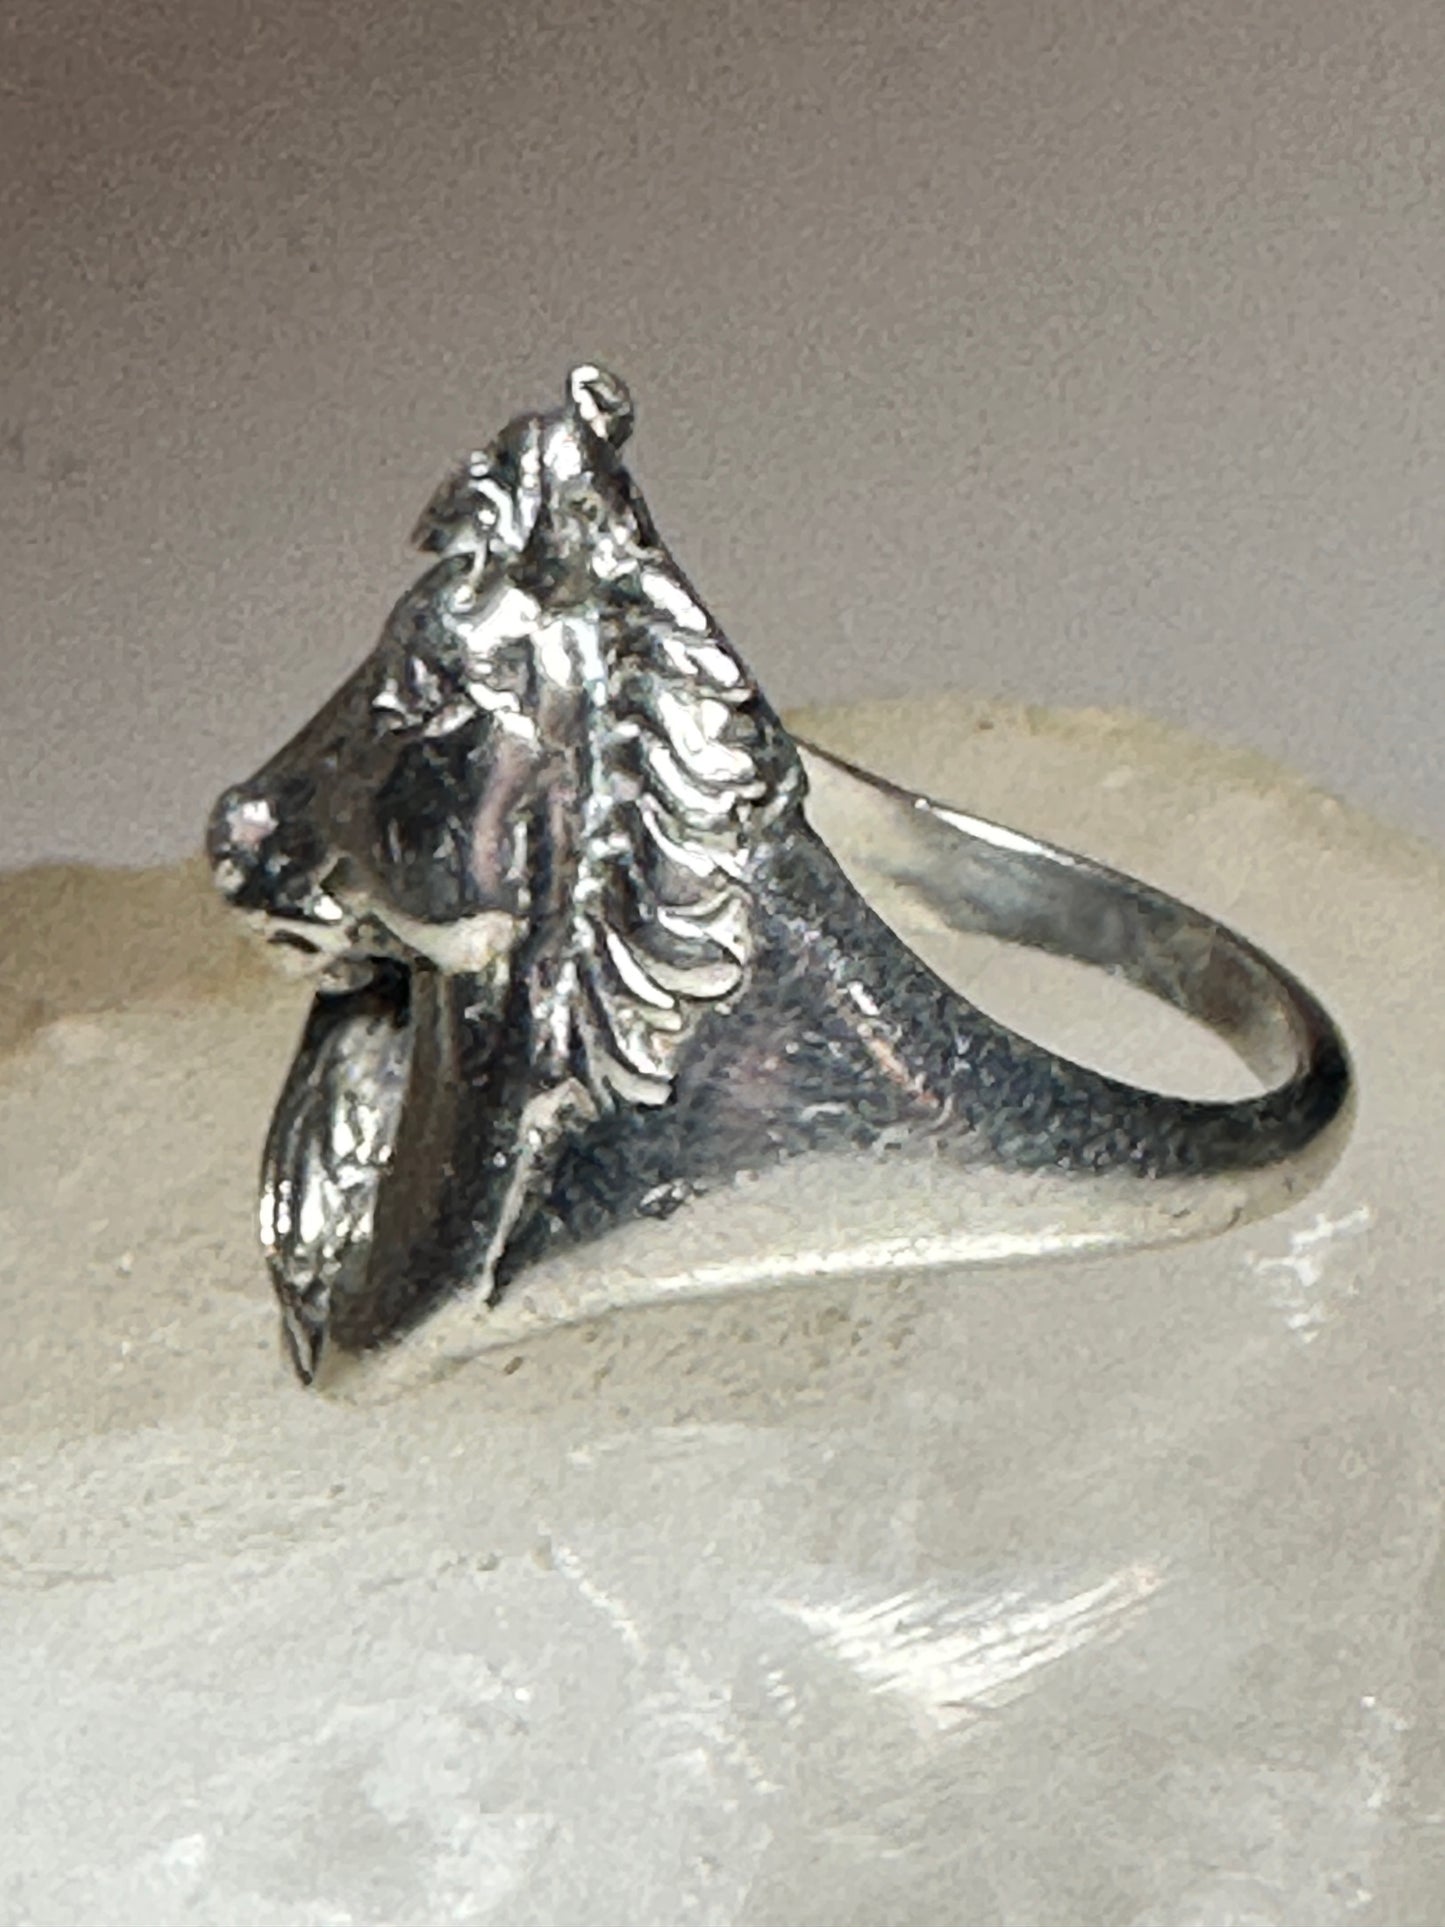 Horse ring size 3.50 cowgirl southwest band pinky sterling silver women girls